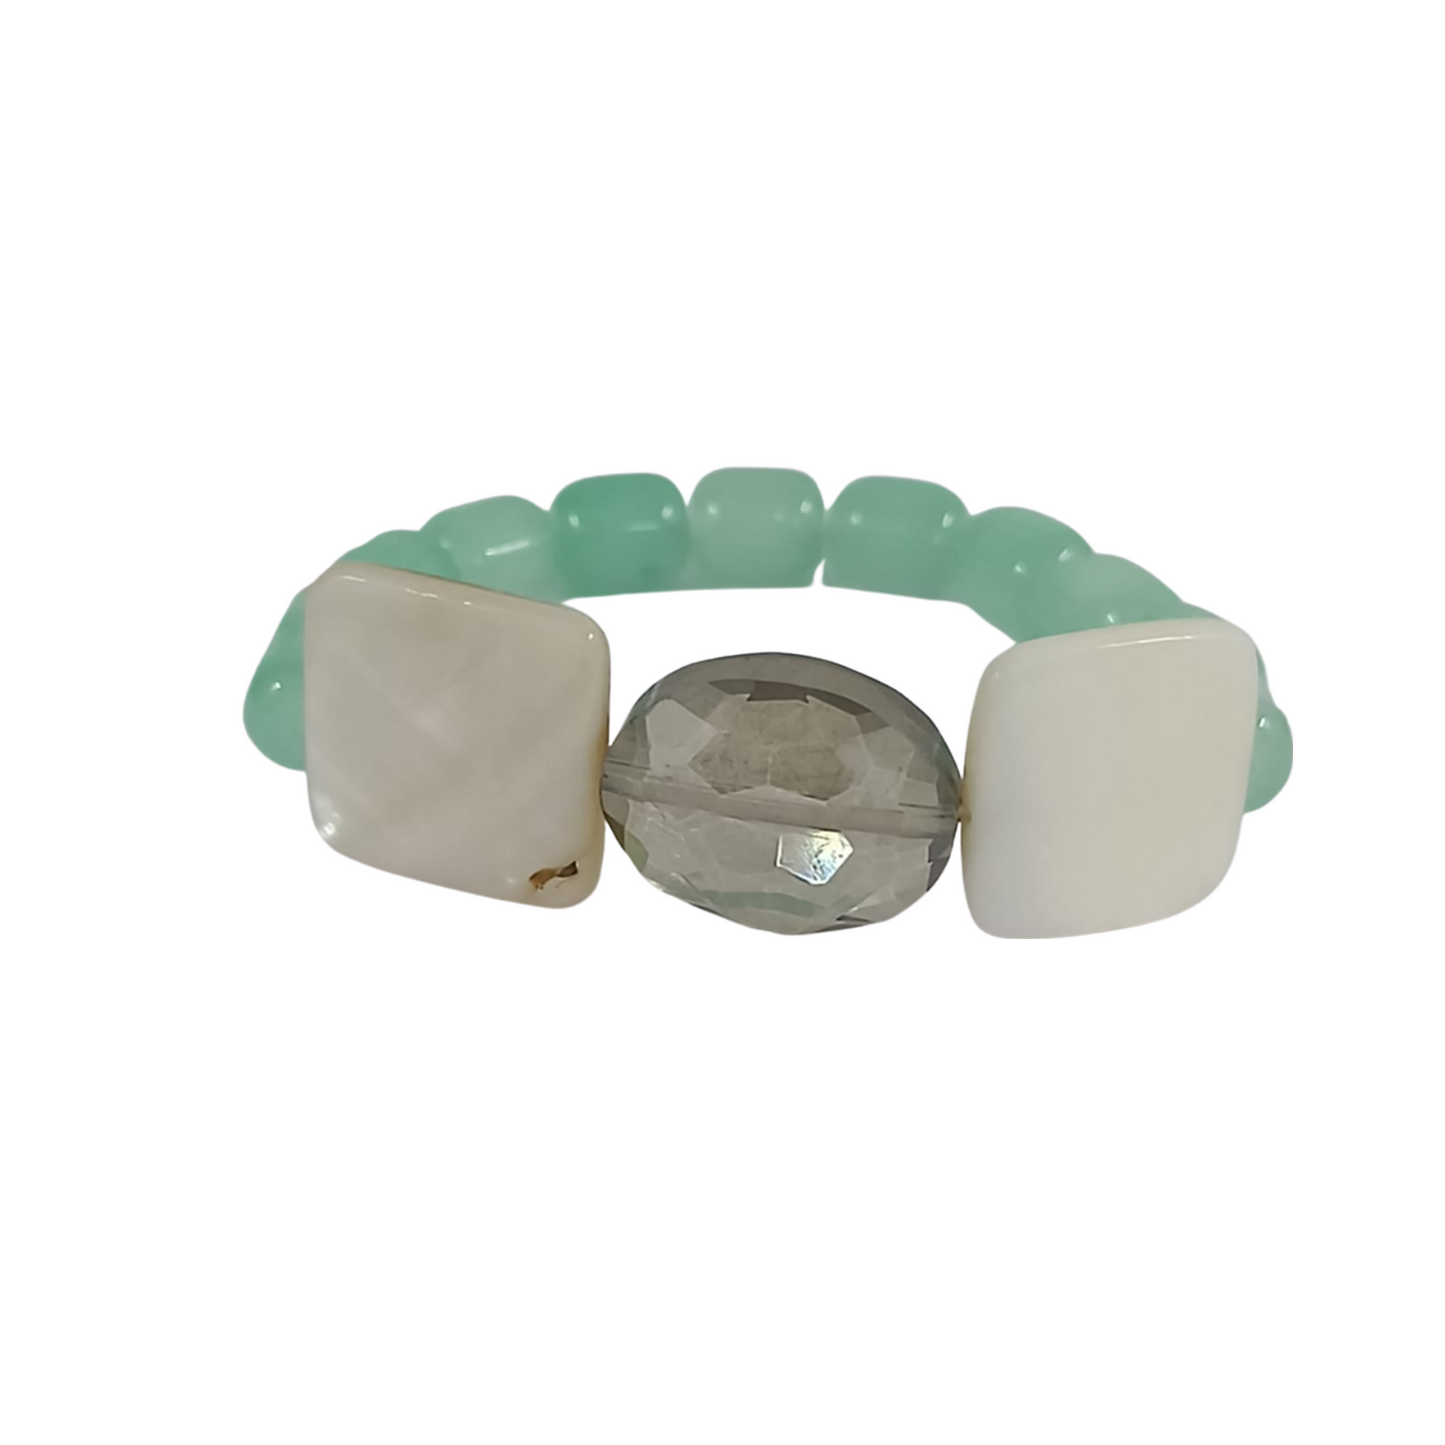 Bdiva Shell Pearl Bracelet with Sage Green Stone.